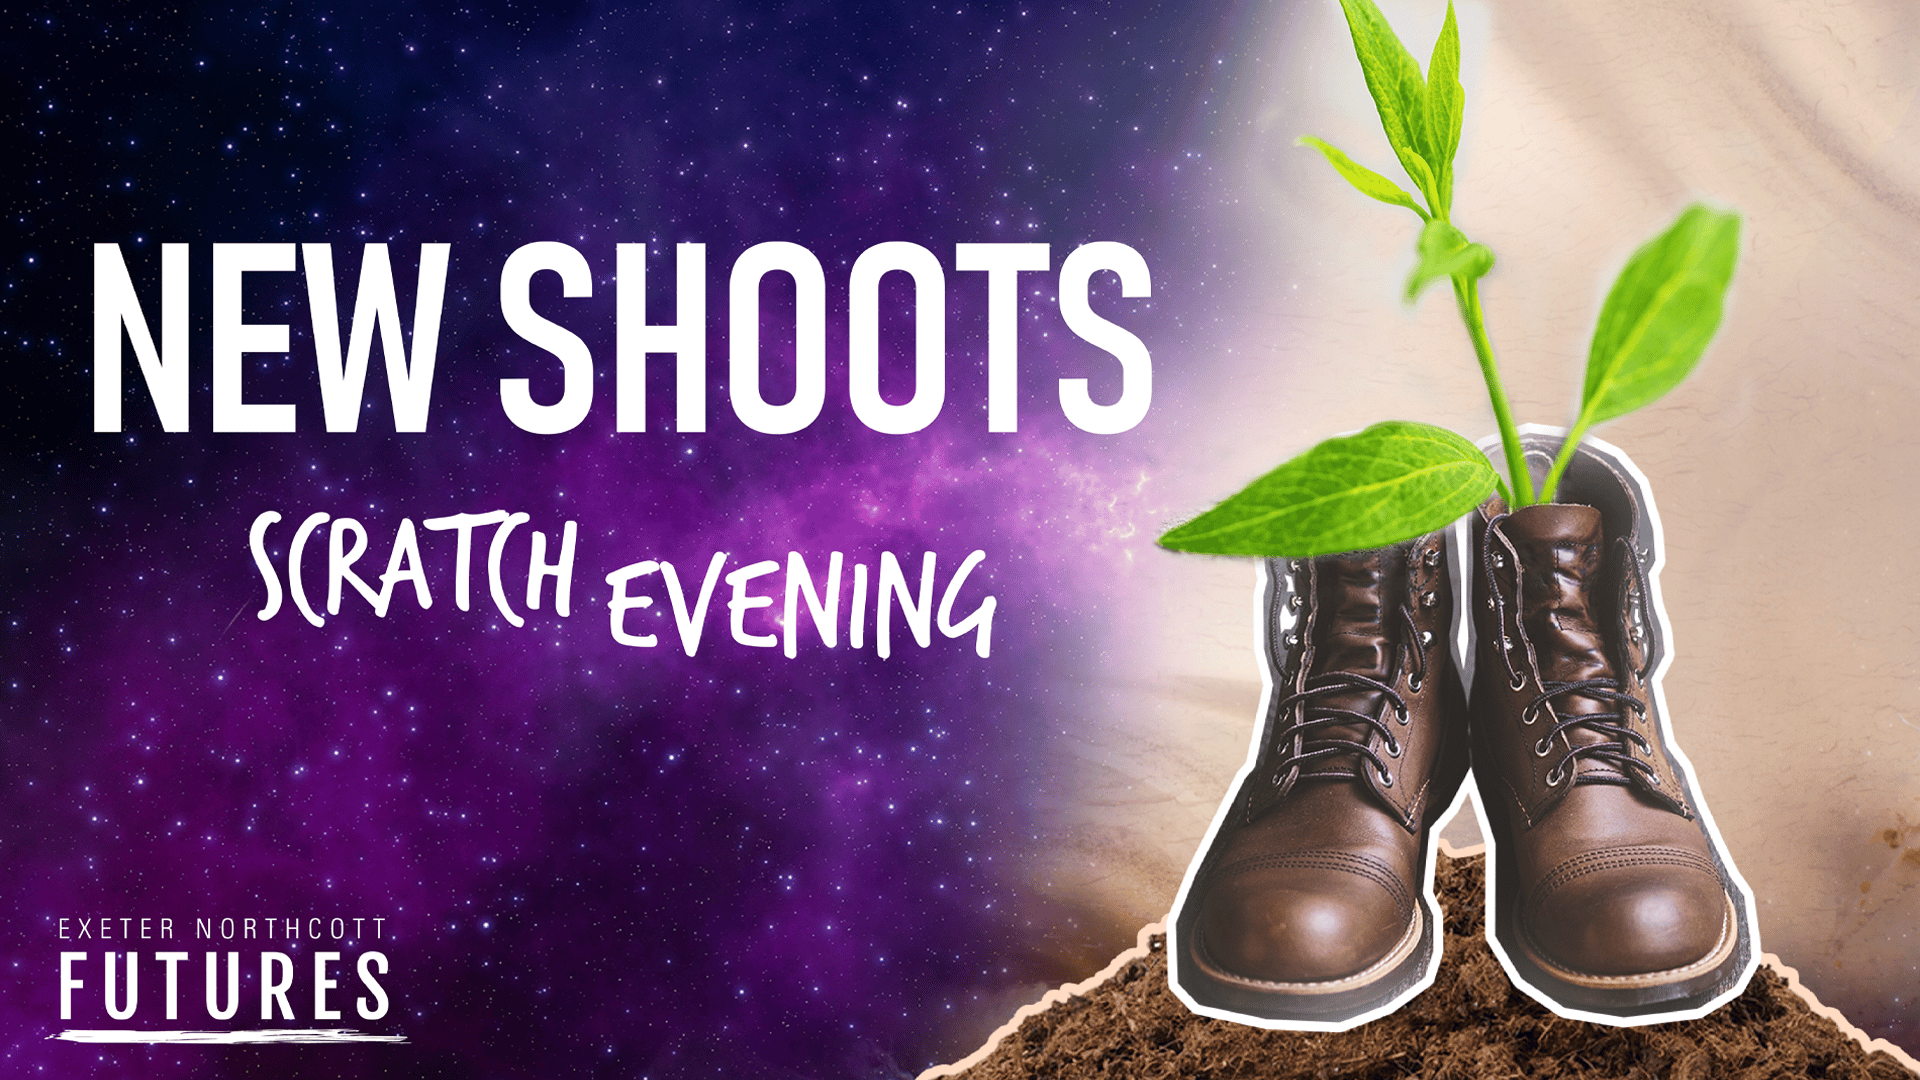 Scratch Evening: New Shoots - a plant growing out of a brown pair of boots on some soil, against the backdrop of a night sky